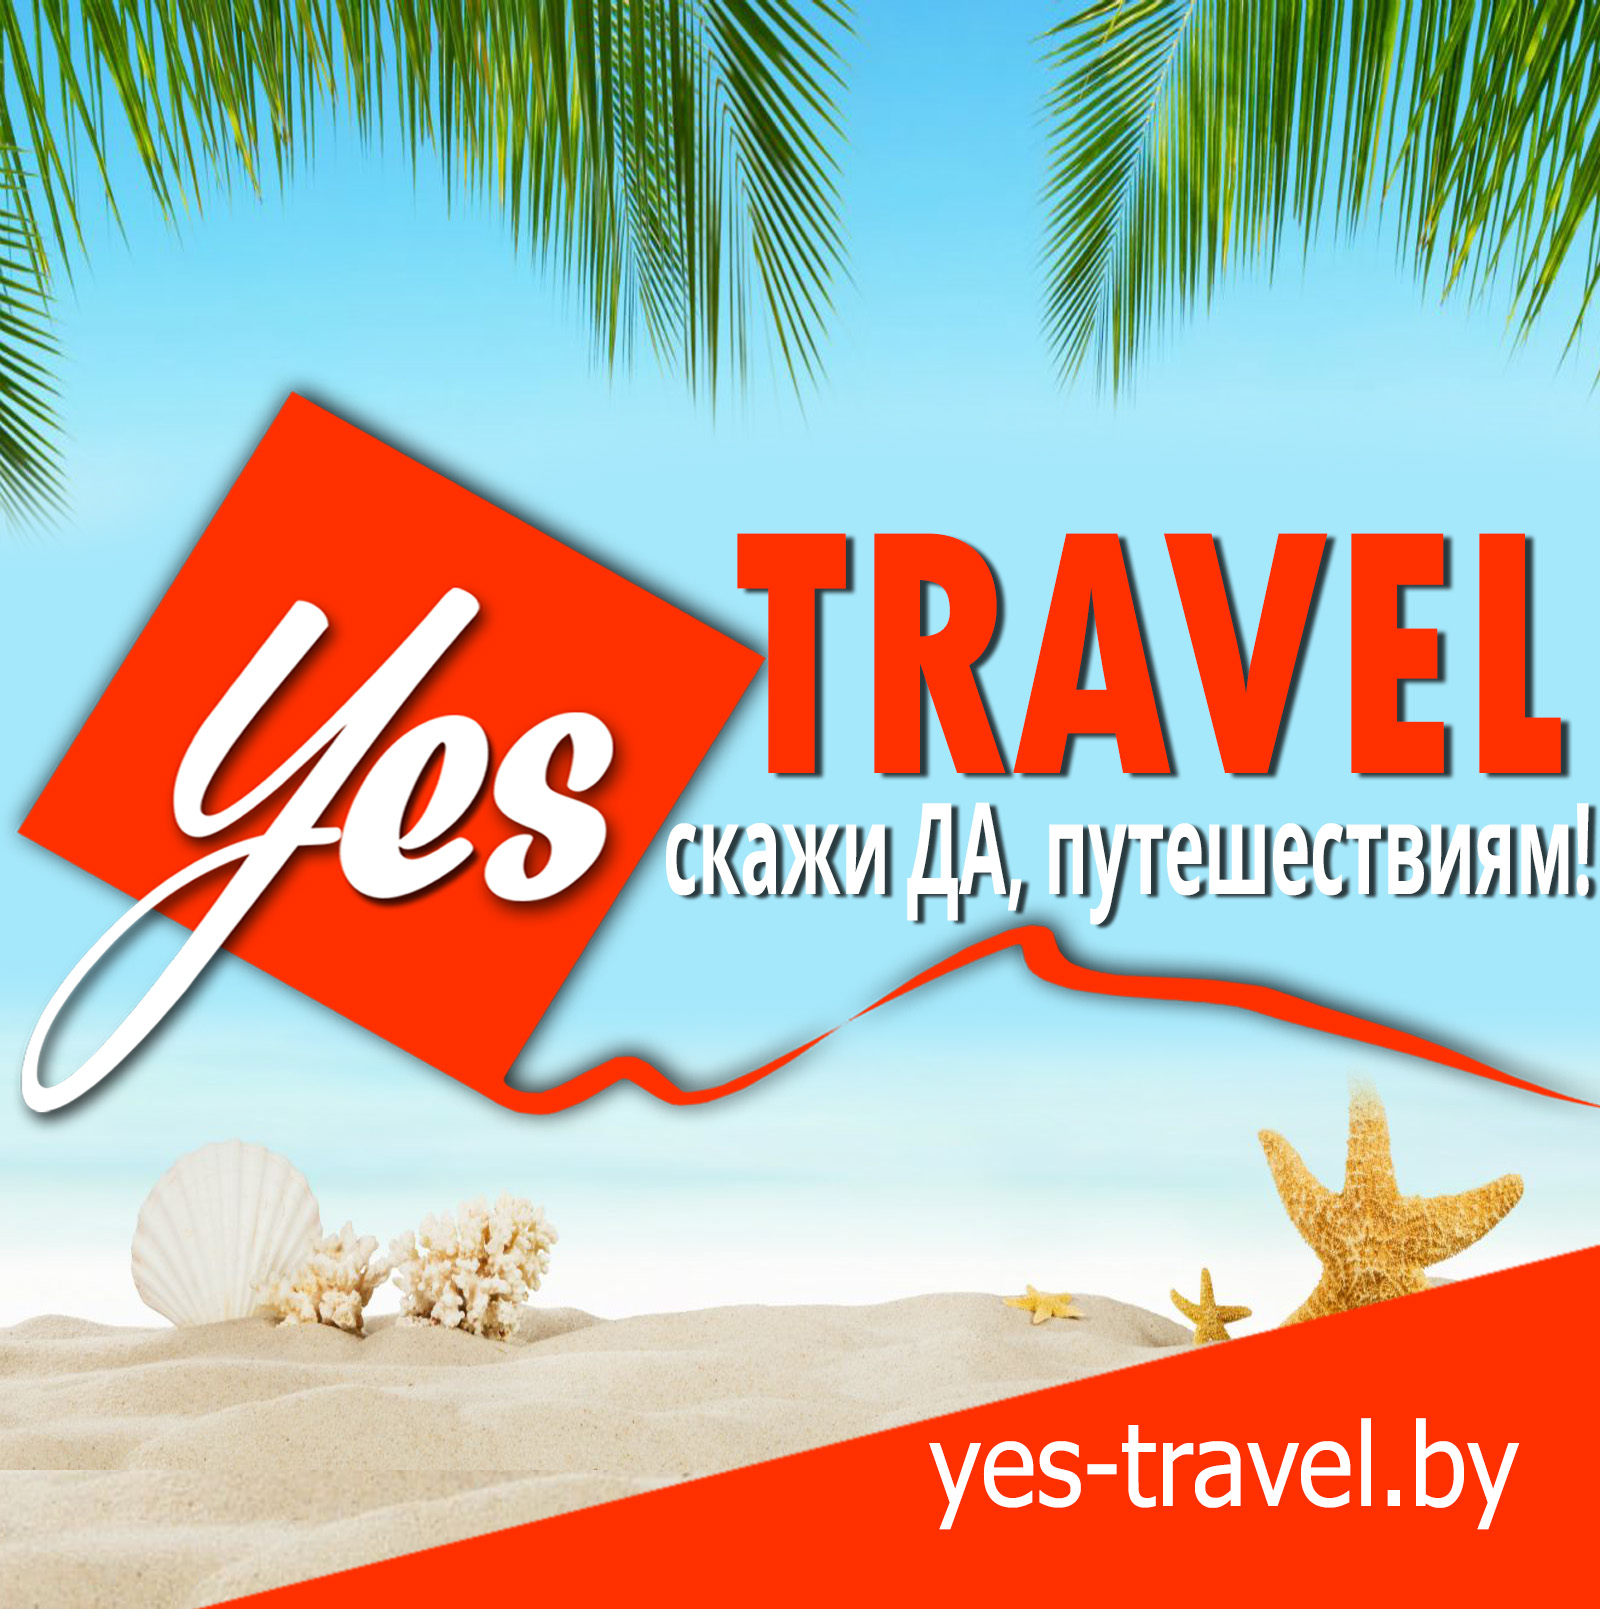 Yes Travel. Тревел Минск. Да Тревел. Travel минск